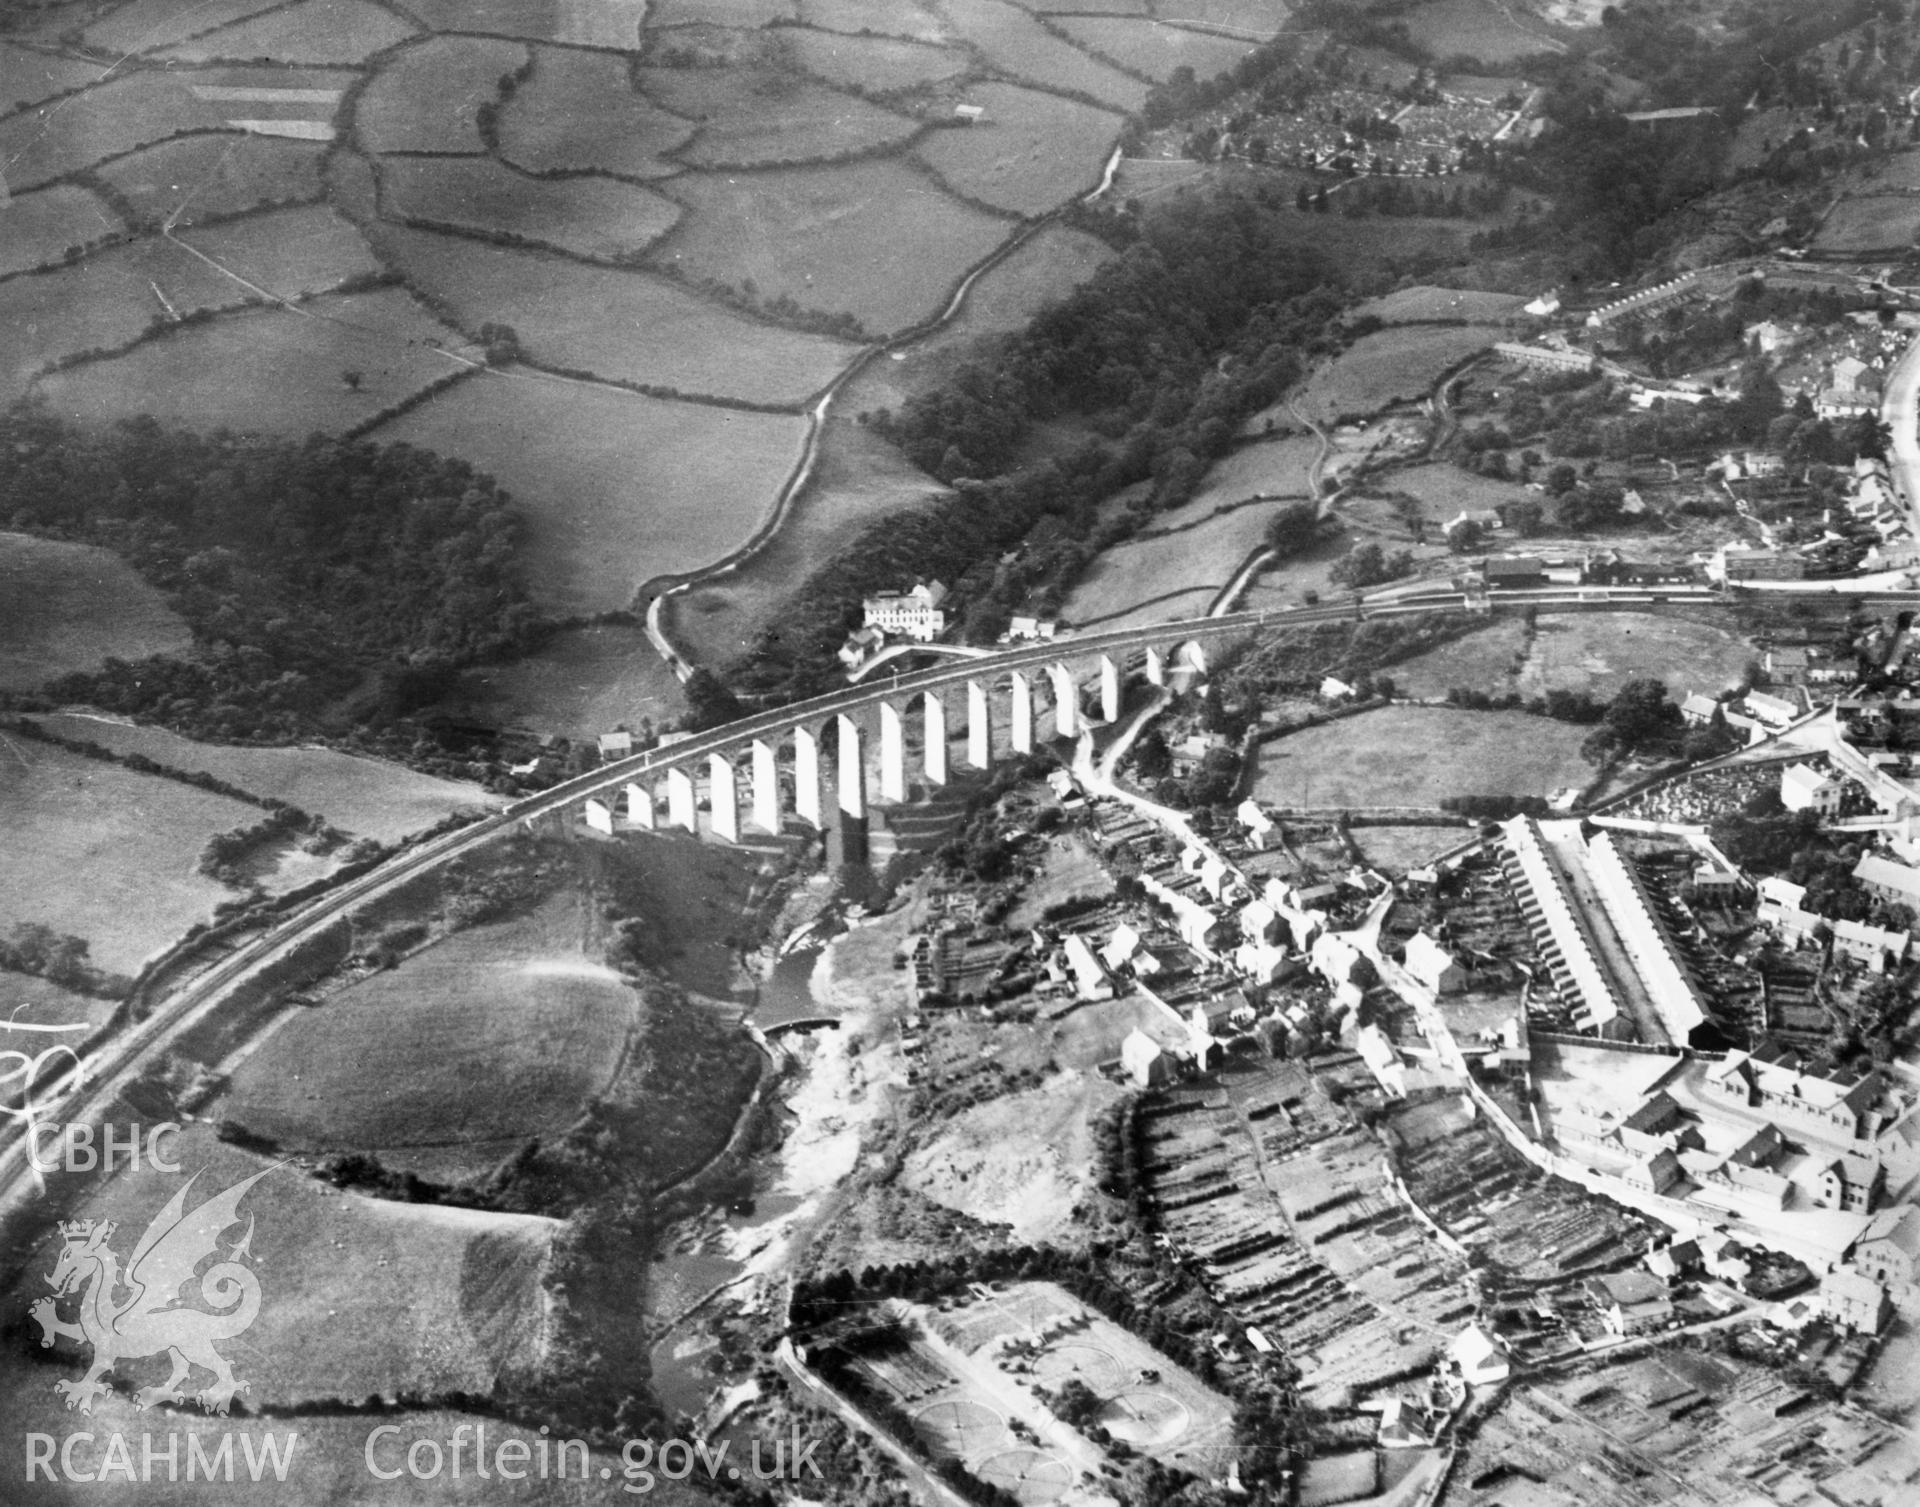 General view of Merthyr Tydfil showing Cefn-Coed-y-Cymmer viaduct. Oblique aerial photograph, 5?x4? BW glass plate.